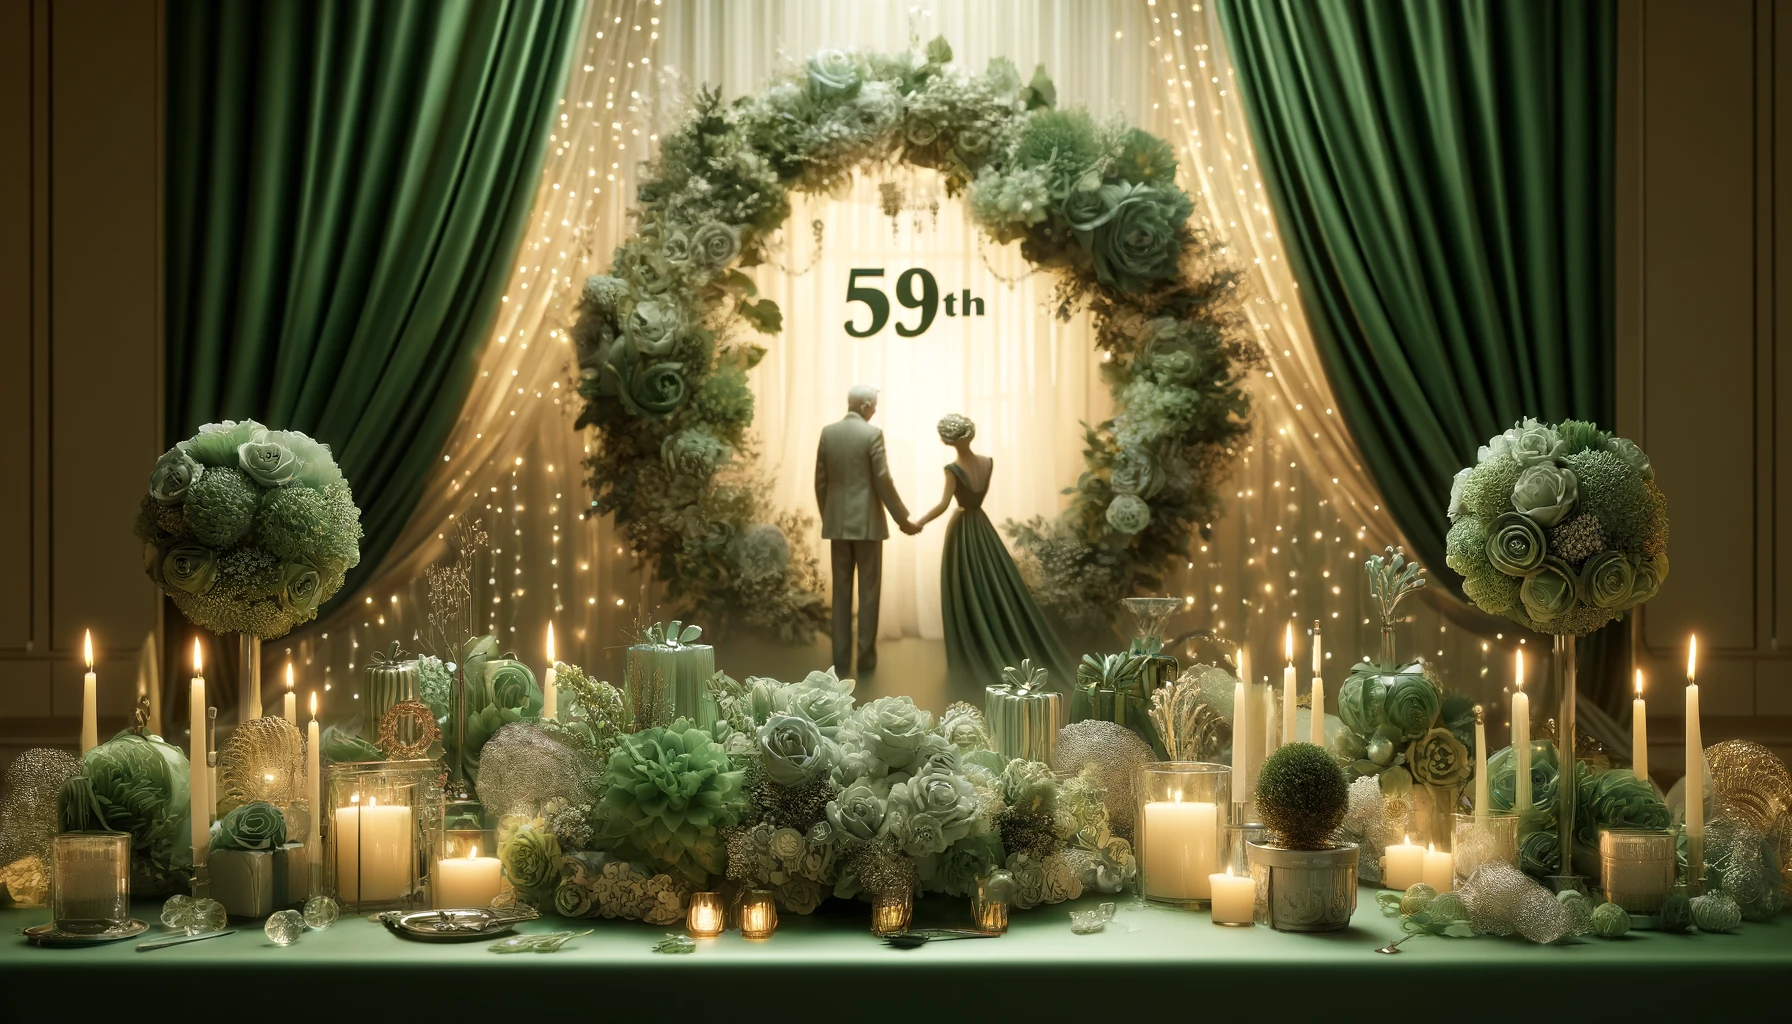 Overview of the 59th Wedding Anniversary